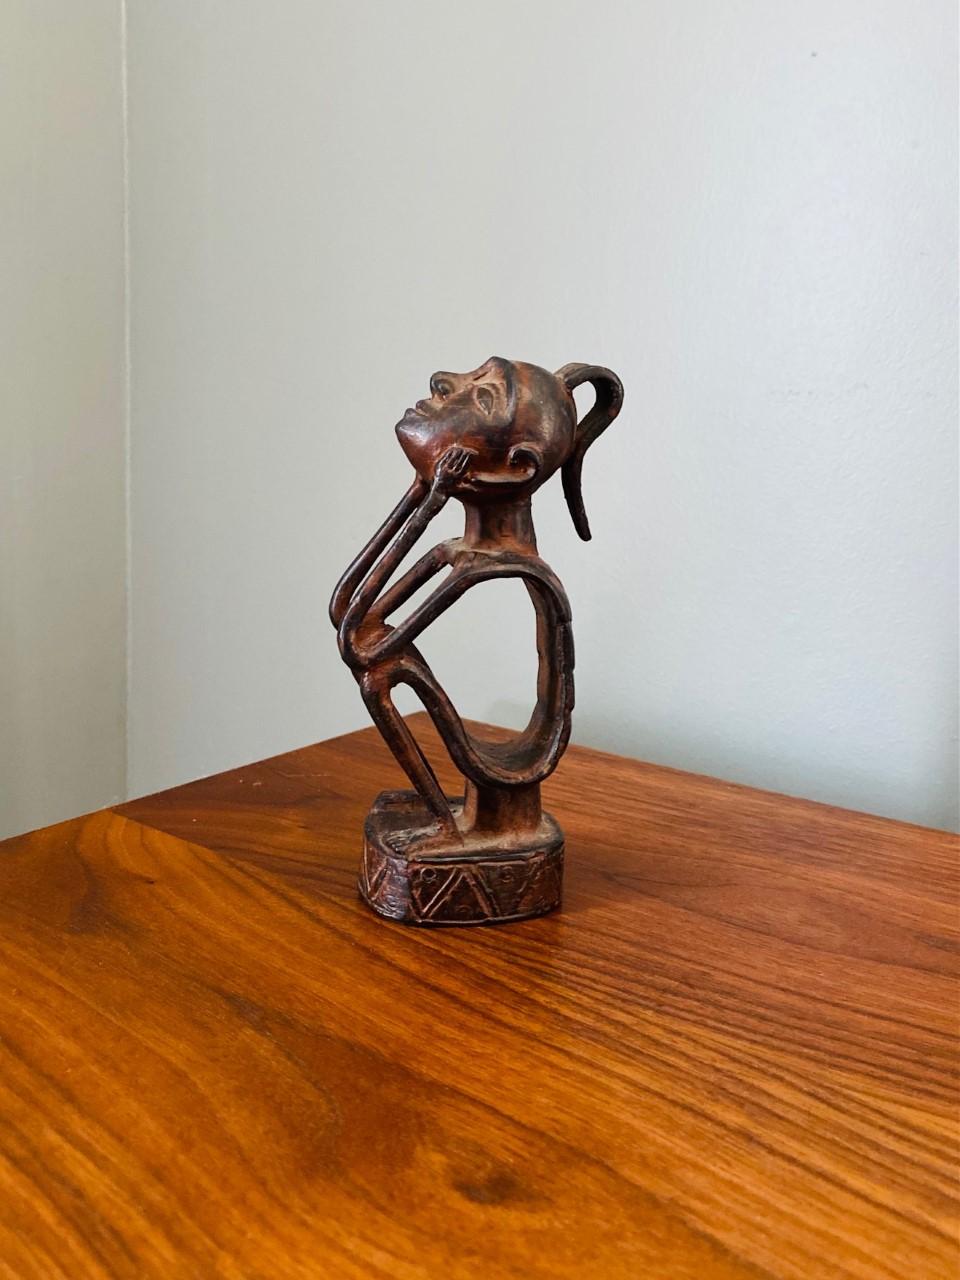 Beautiful and rare vintage figure.  Stylistically primitive and raw, this beautiful bronze statue represents an old protective ancestor or soul.  The skeletal figure and large head evoke a clear connection that alludes to the representation of this